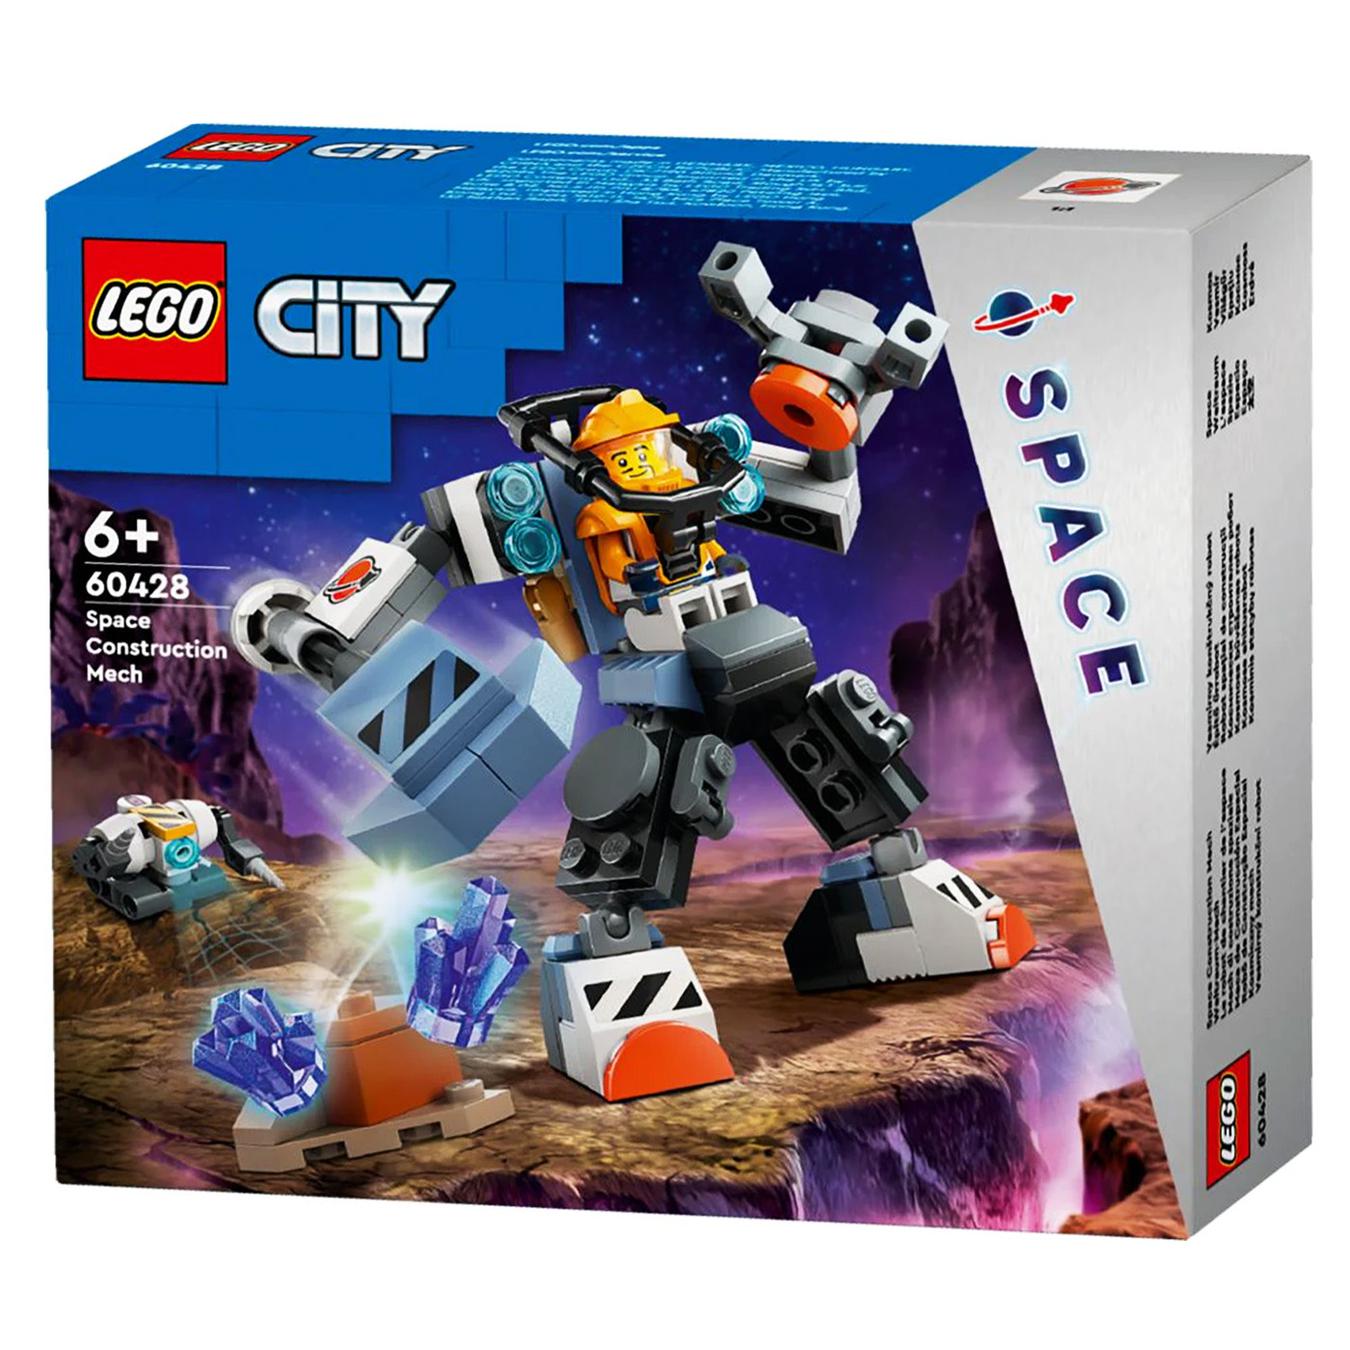 Constructor LEGO City 60428 Robot suit for construction in space